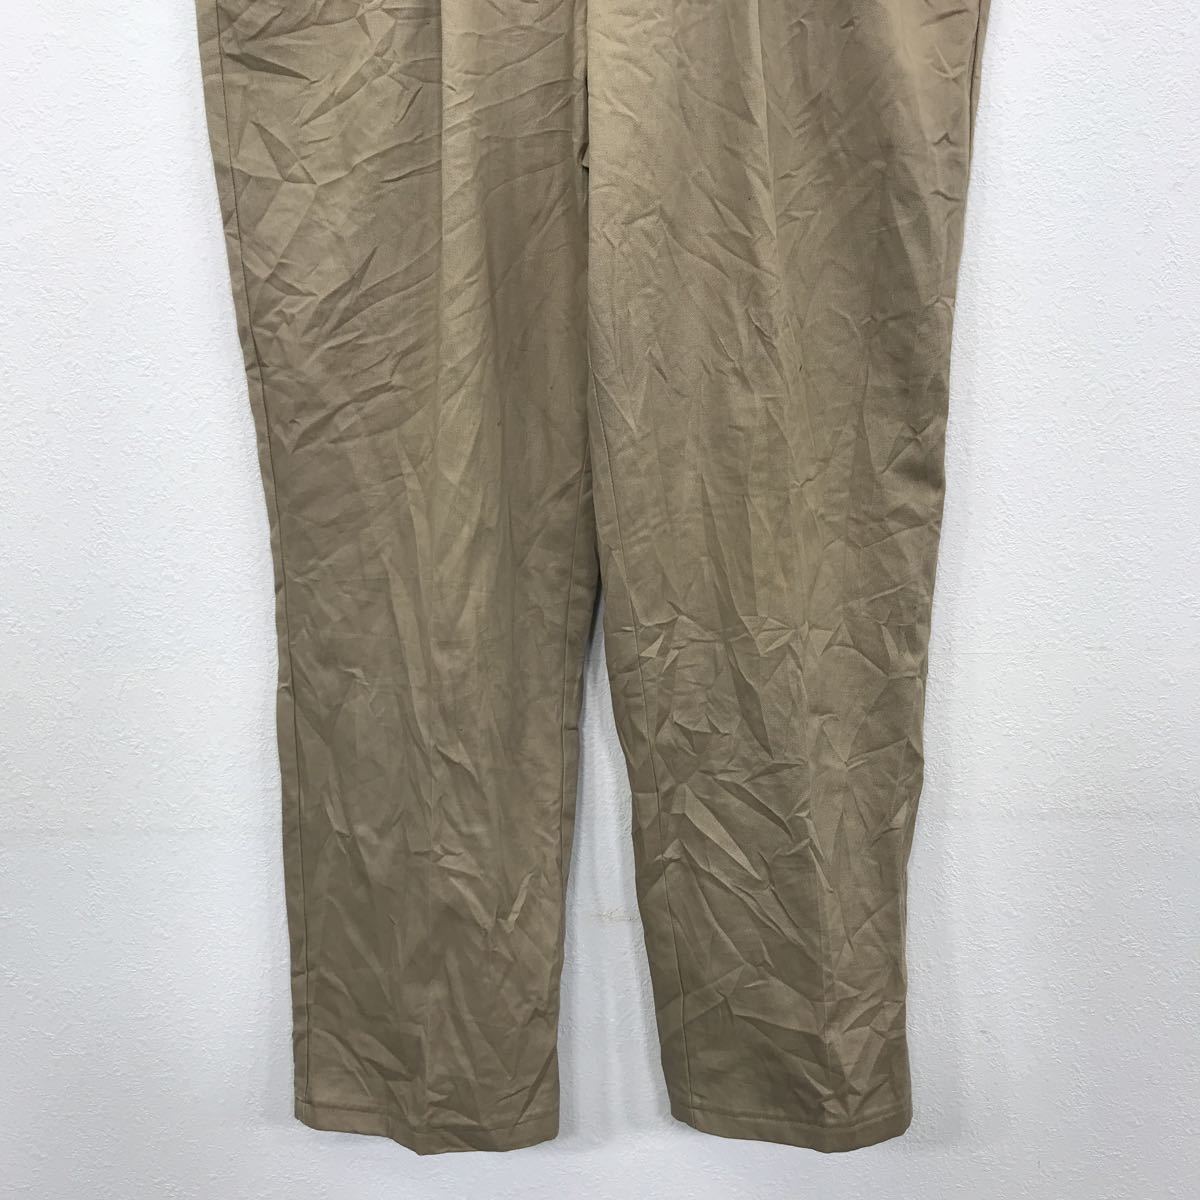 DOCKERS chinos W44 Docker's beige big size Mexico made old clothes . America buying up 2304-544